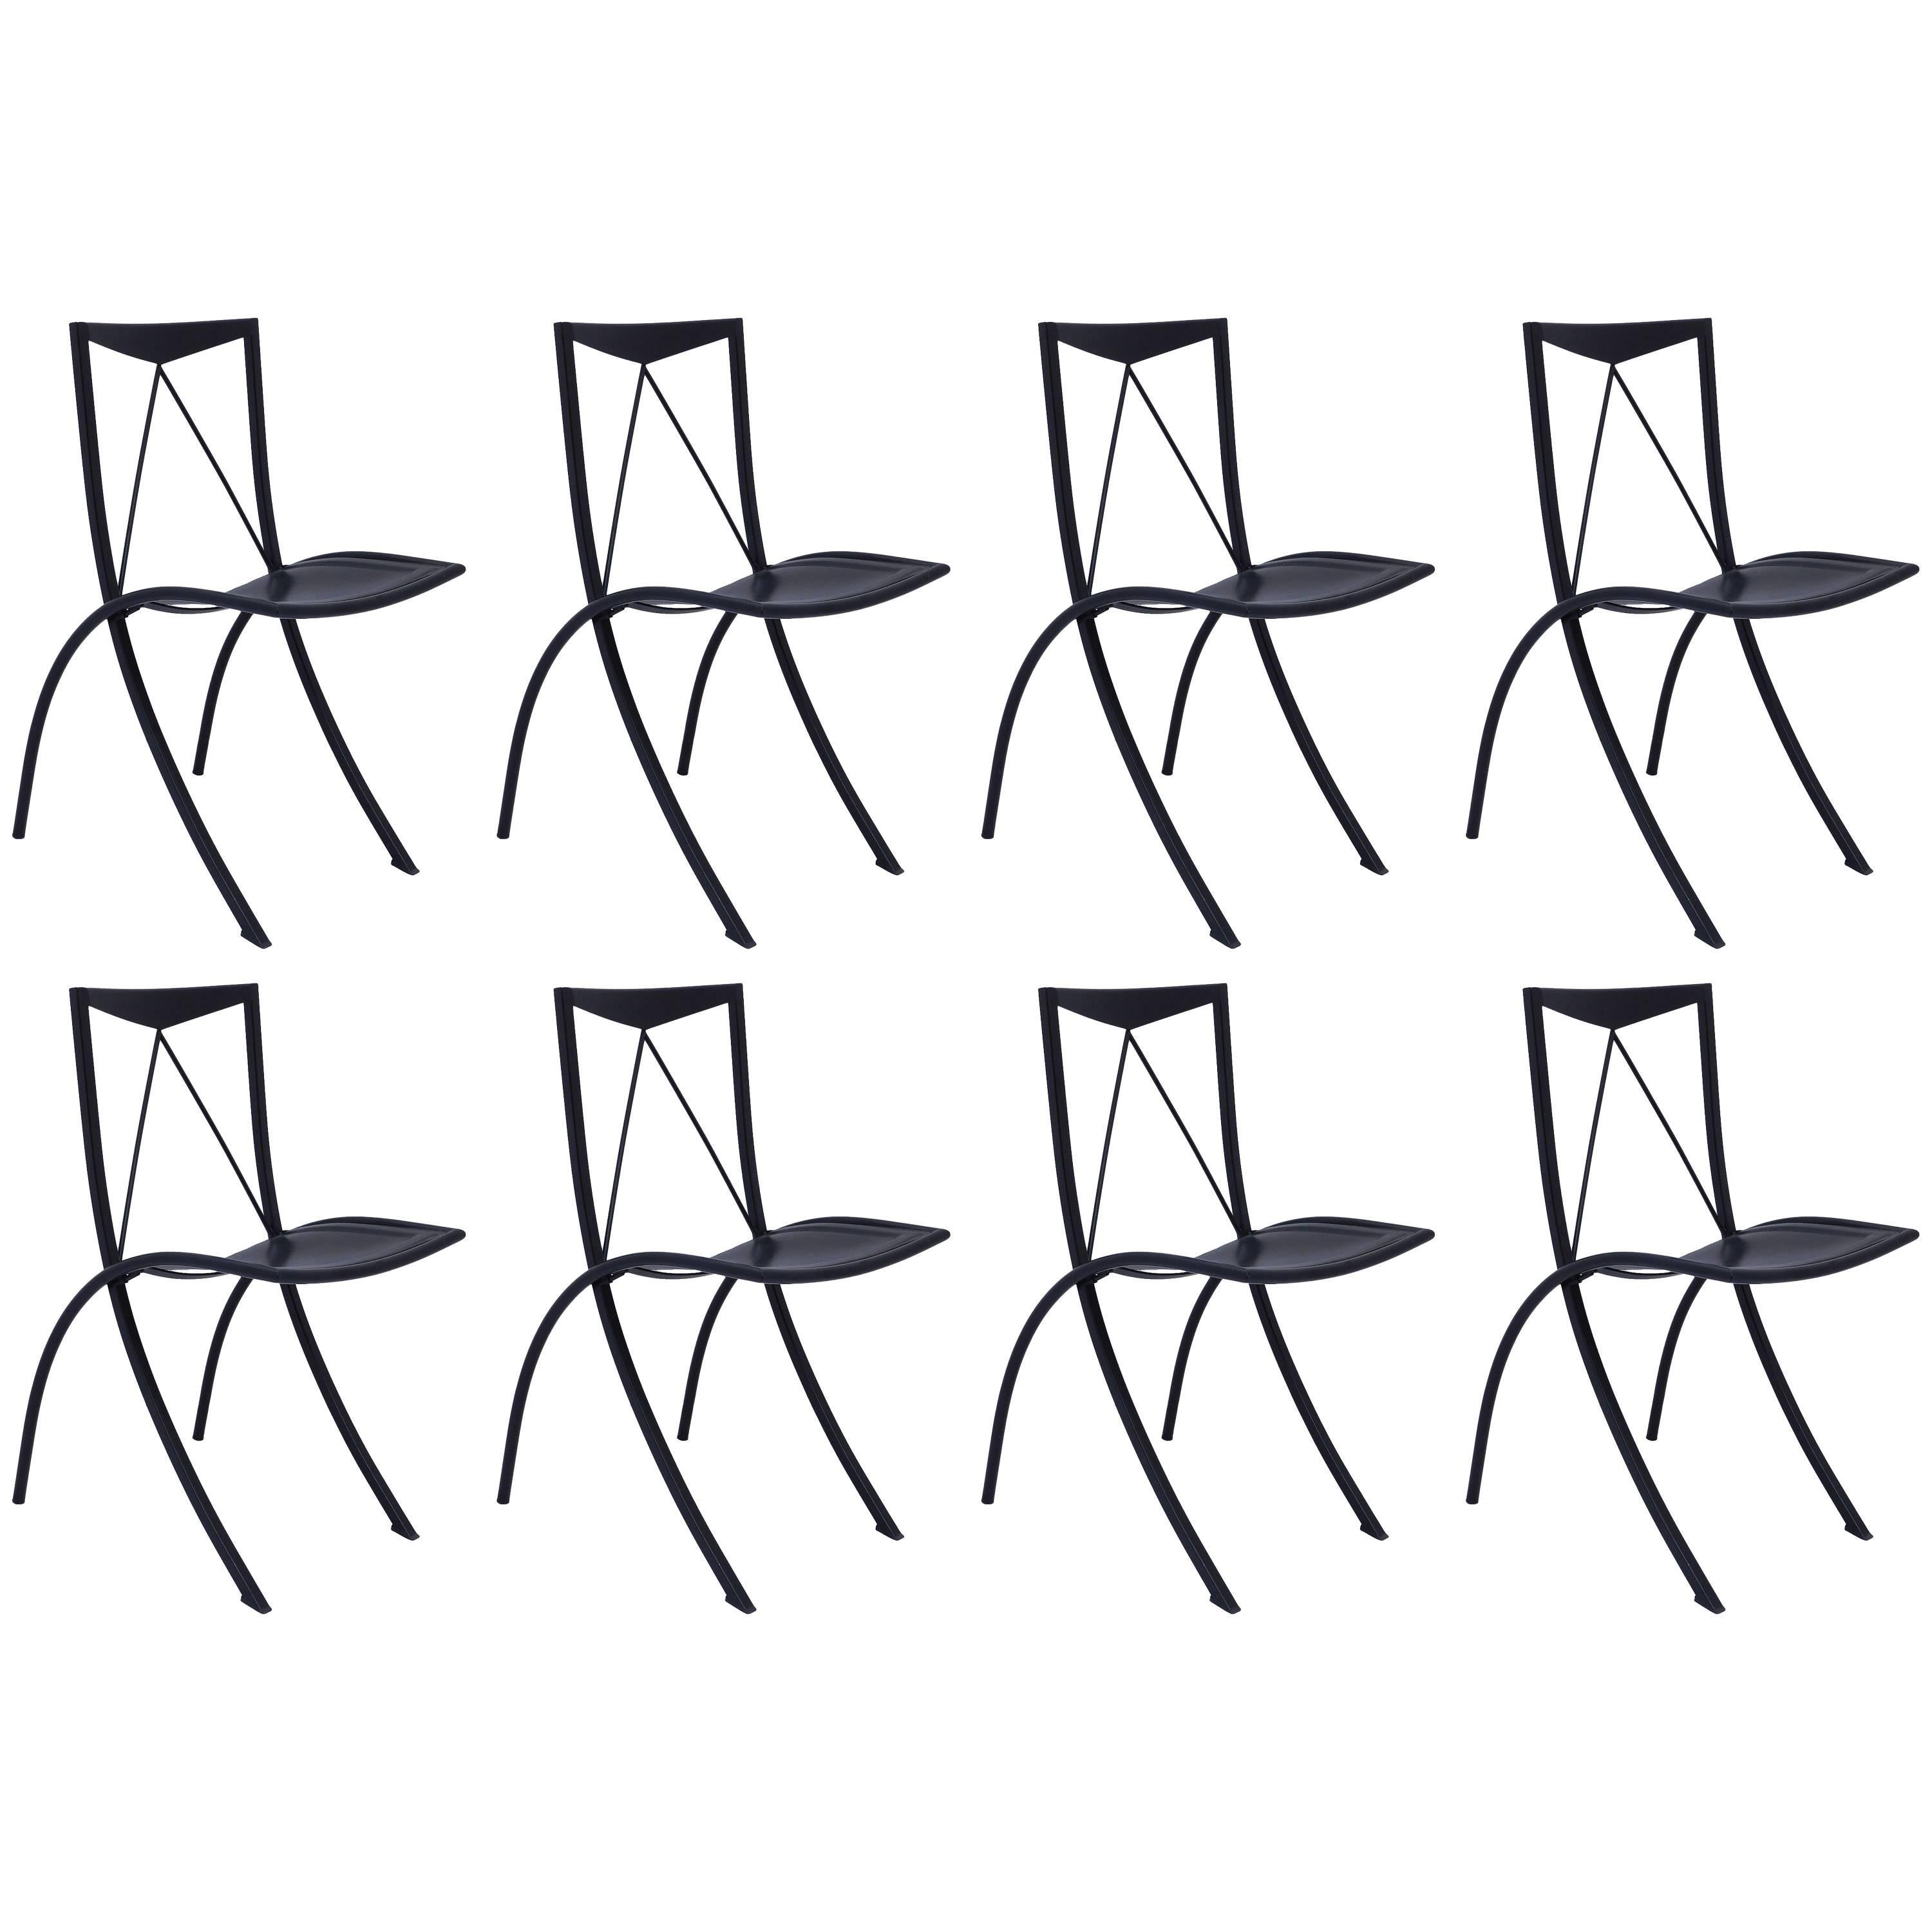 Eight Folding Dining Chairs Cattelan Italia Black Leather Vintage, 20th Century For Sale